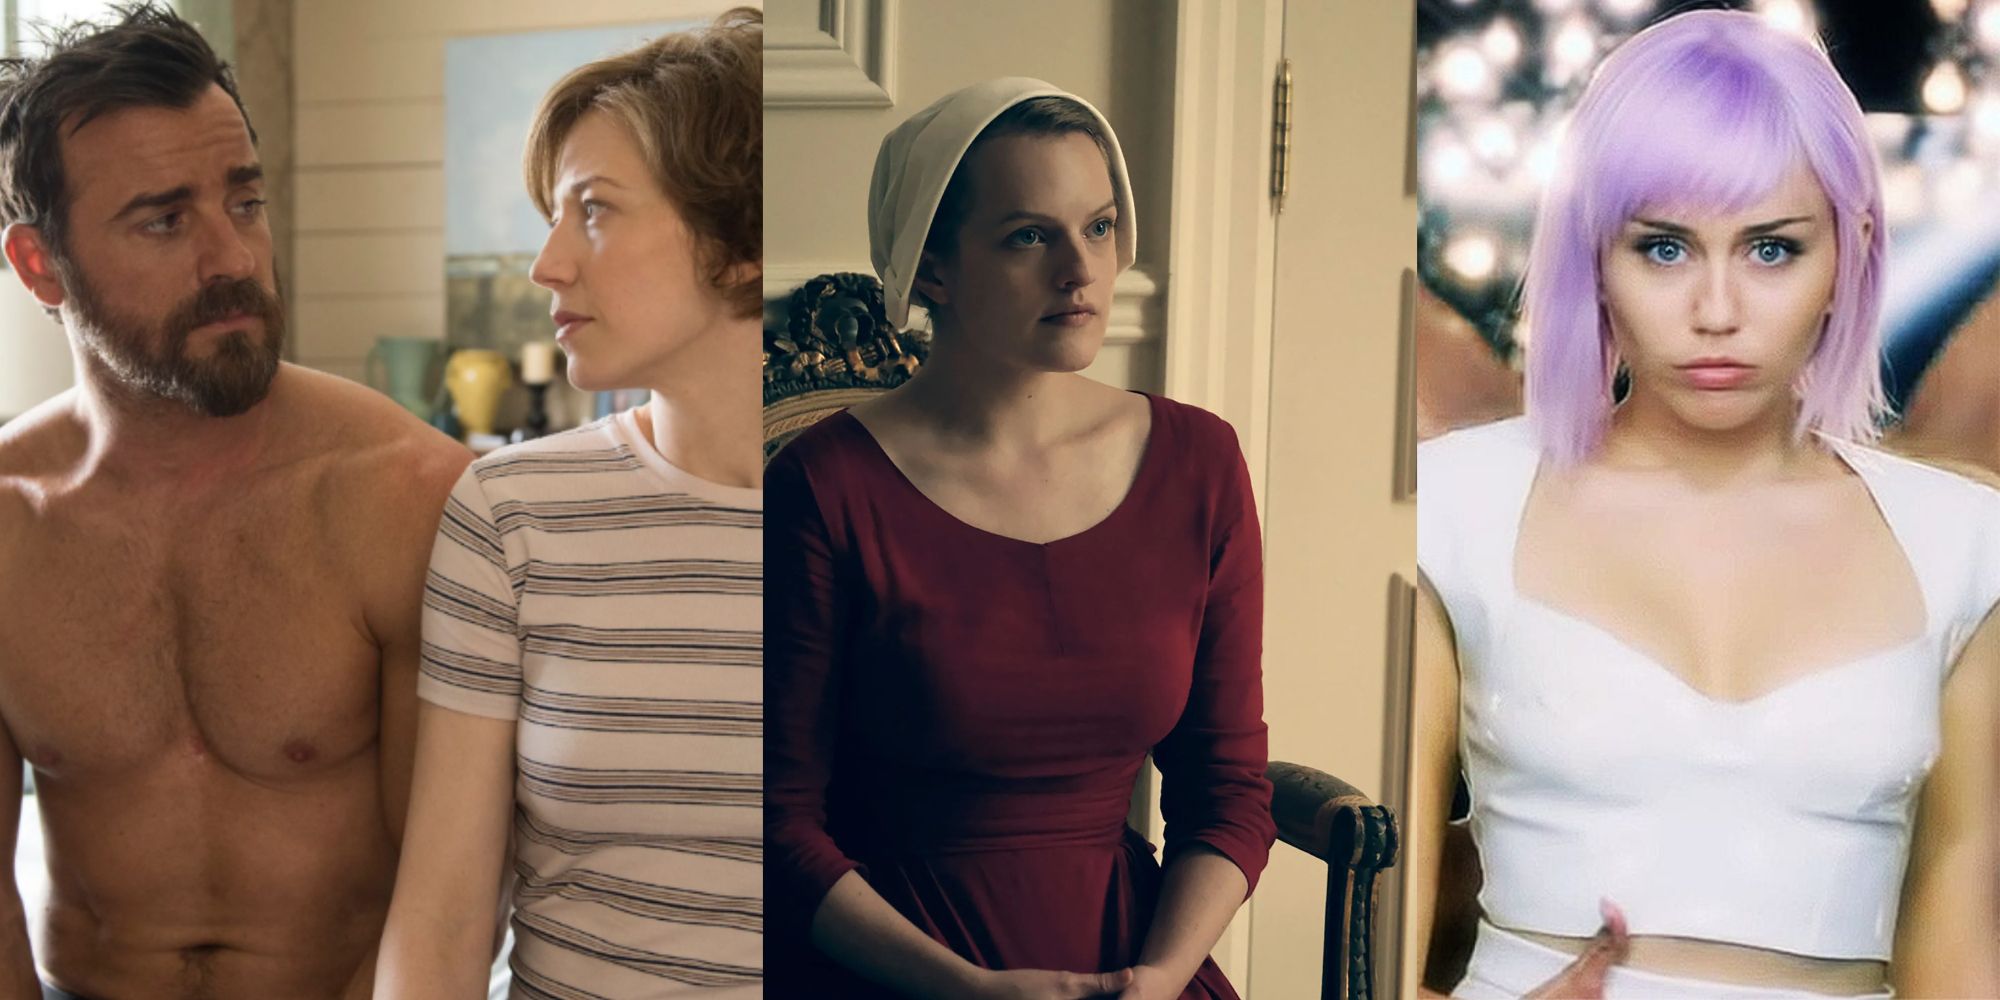 Split images of The Leftovers, The Handmaid's Tale, and Black Mirror